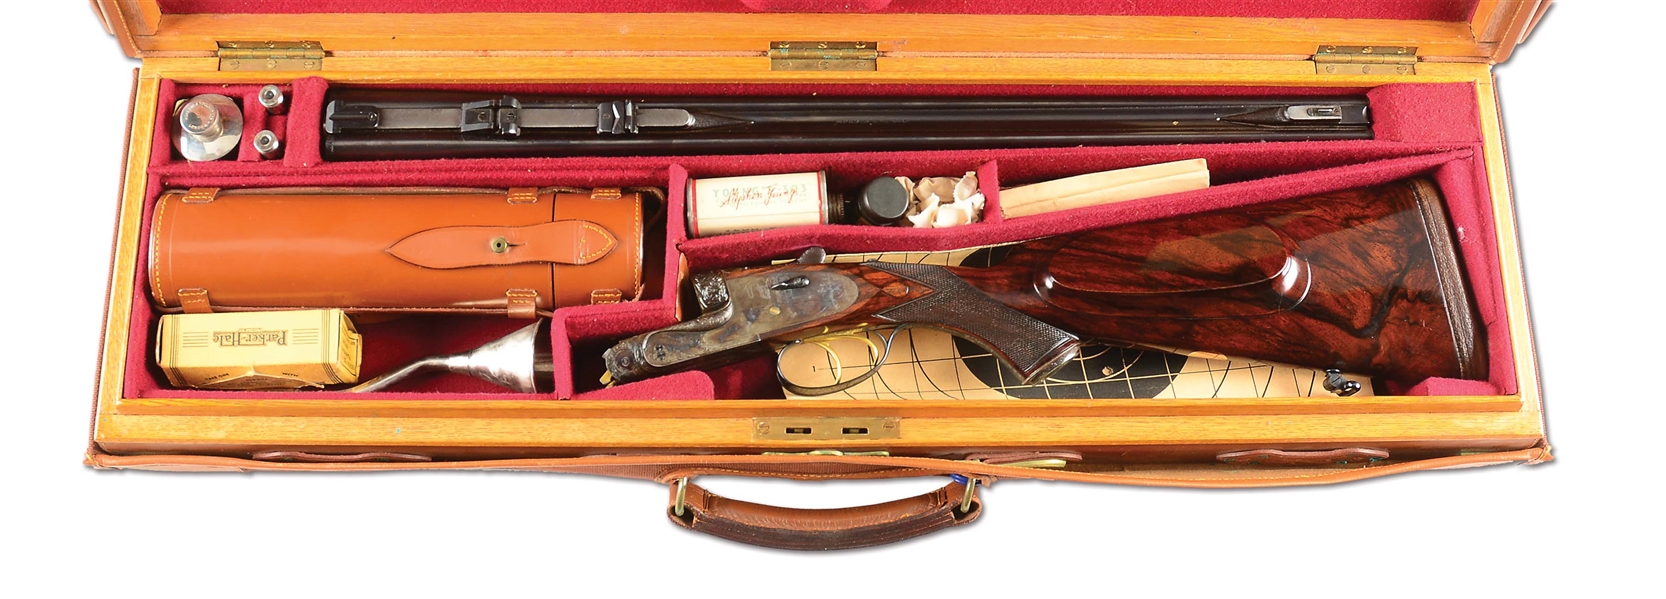 (M) EXQUISITE HOLLAND AND HOLLAND ROYAL DELUXE RIFLE WITH OAK AND LEATHER CASE. 